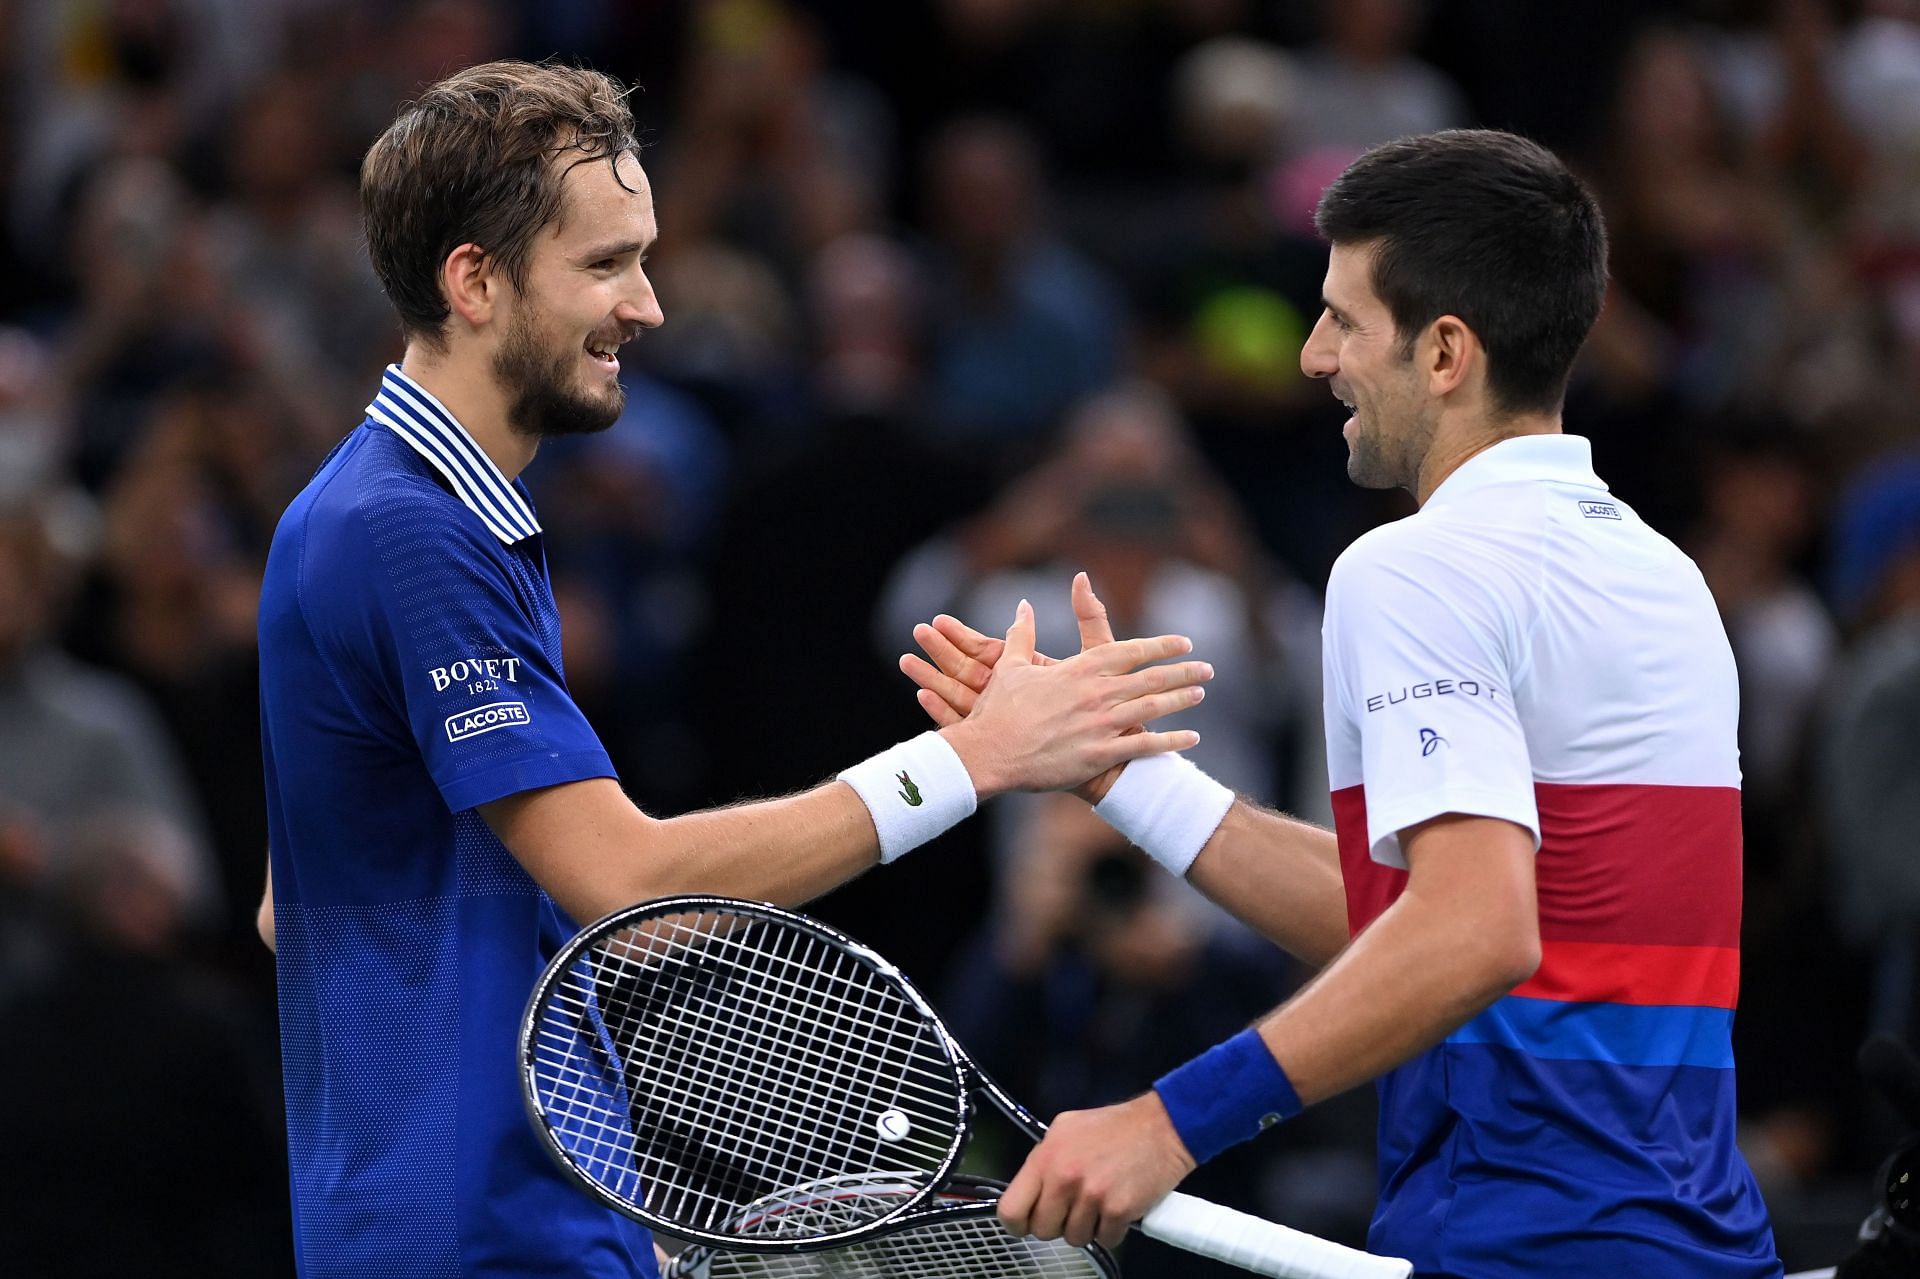 After being denied of a calendar Slam at the 2021 US Open, Novak Djokovic (right) gets his revenge in his next meeting with Daniil Medvedev (left) nearly two months later in the Paris Masters.